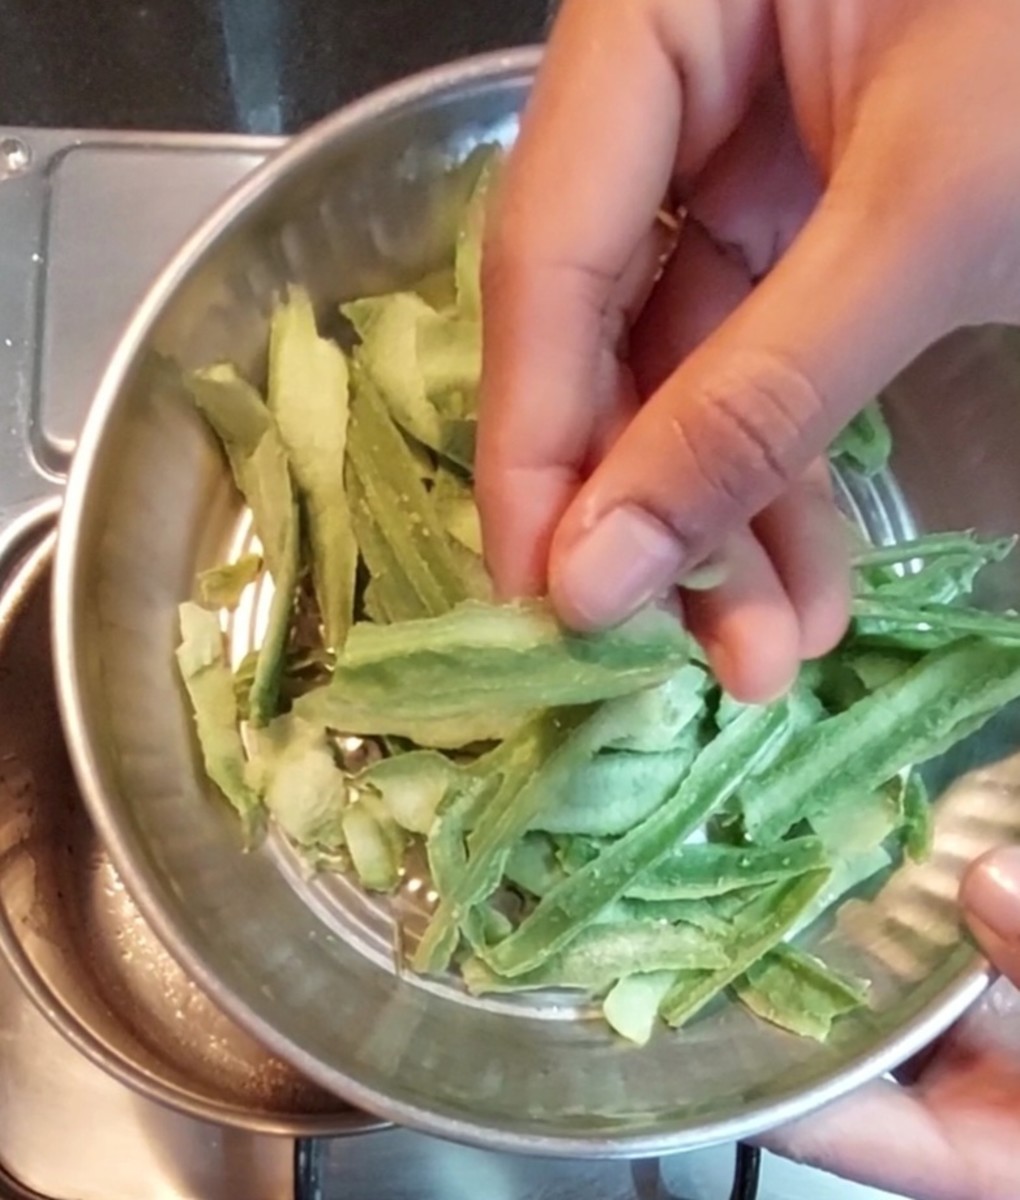 In the same frying pan, heat 1 teaspoon oil and add 1/2 cup ridge gourd peels. Saute for 1 minute. 